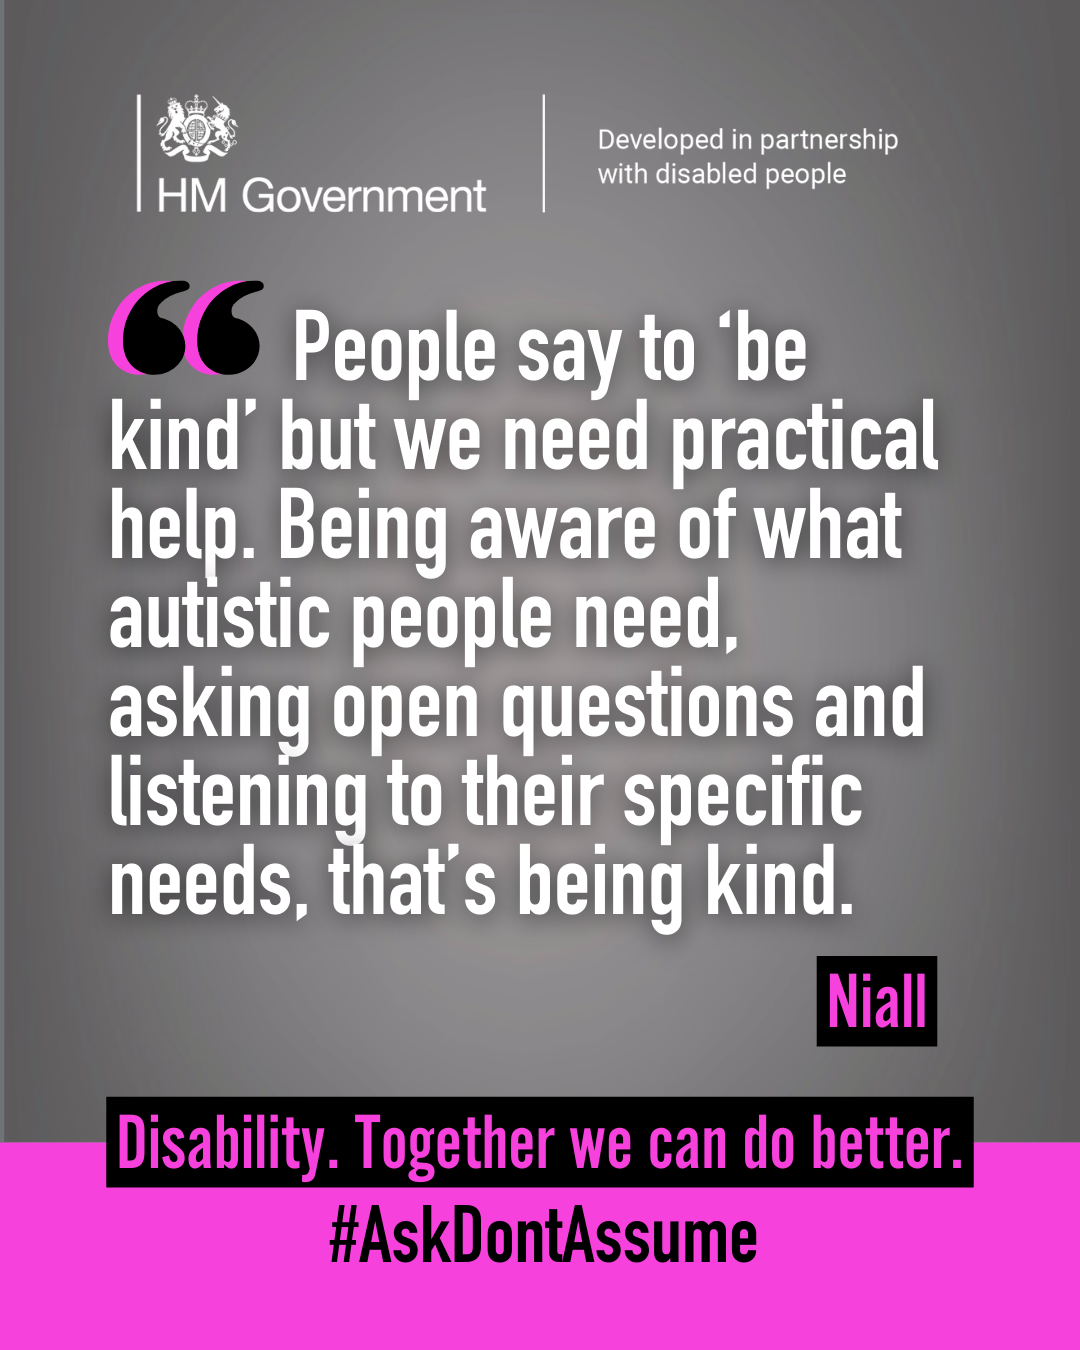 Dark grey portrait graphic with the HM Government logo and “Developed in partnership with disabled people” at the top. A quote from Niall reads: “People say to ‘be kind’ but we need practical help. Being aware of what autistic people need, asking open questions and listening to their specific needs, that’s being kind”. At the bottom of the graphic it reads: “Disability. Together we can do better. #AskDontAssume”